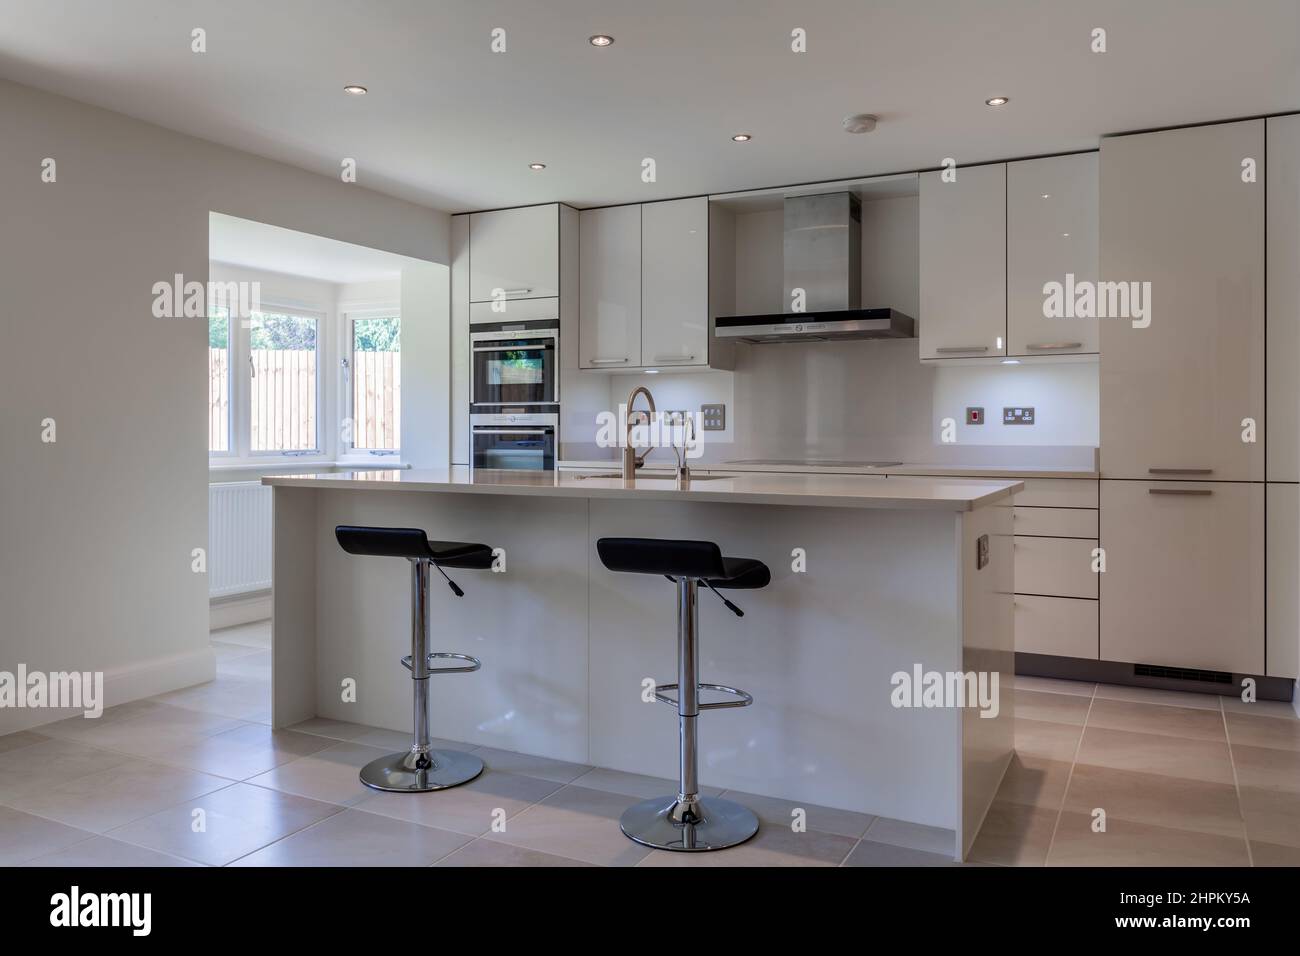 Cambridge, Cambridgeshire - Sept 4 2010: Modern kitchen design with peninsular unit breakfast bar, stools and fitted cabinets with built in appliances Stock Photo